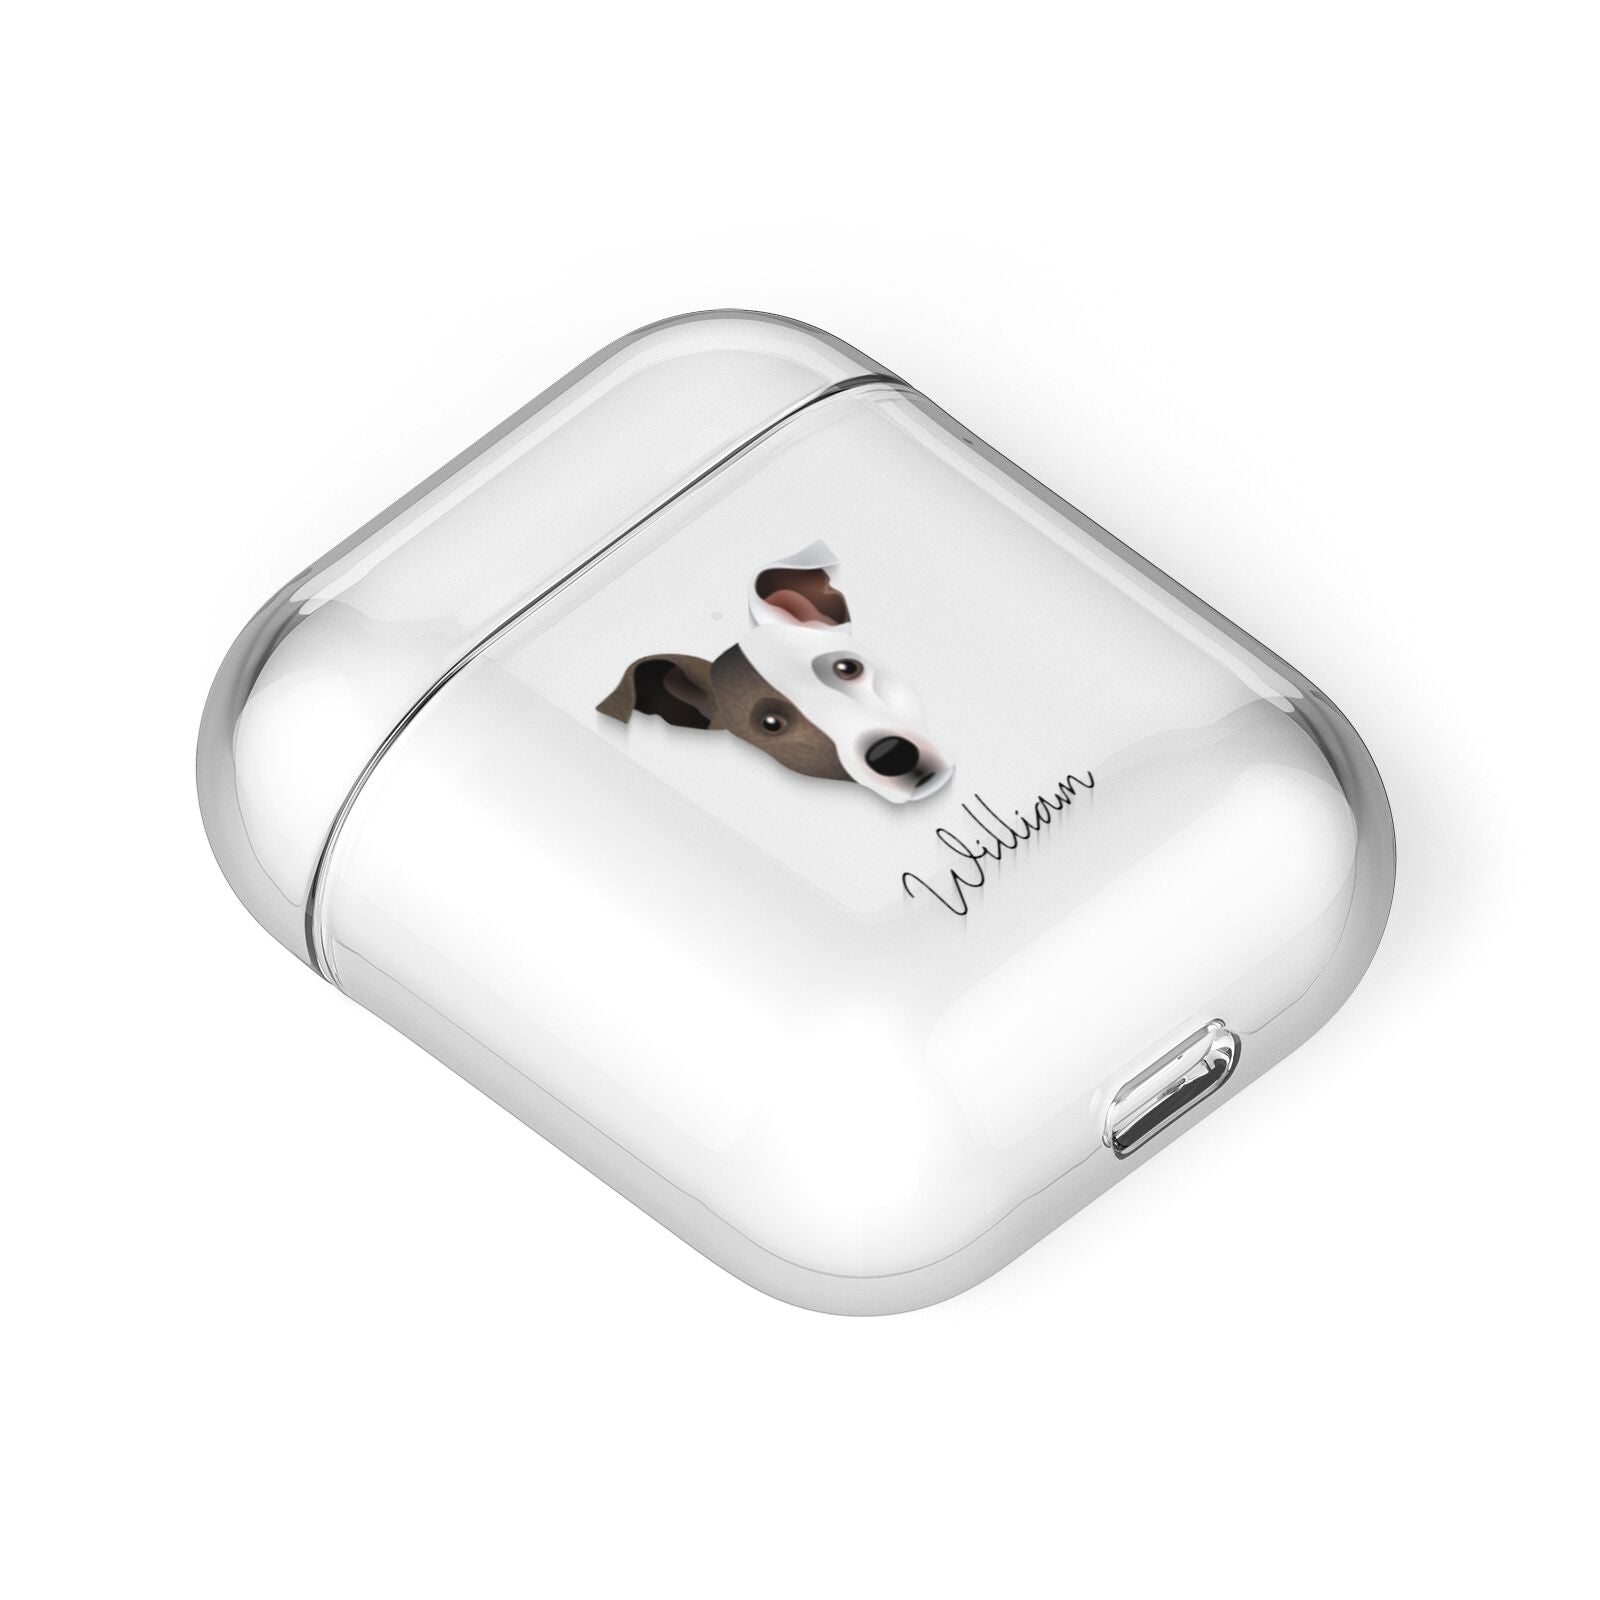 Staffy Jack Personalised AirPods Case Laid Flat